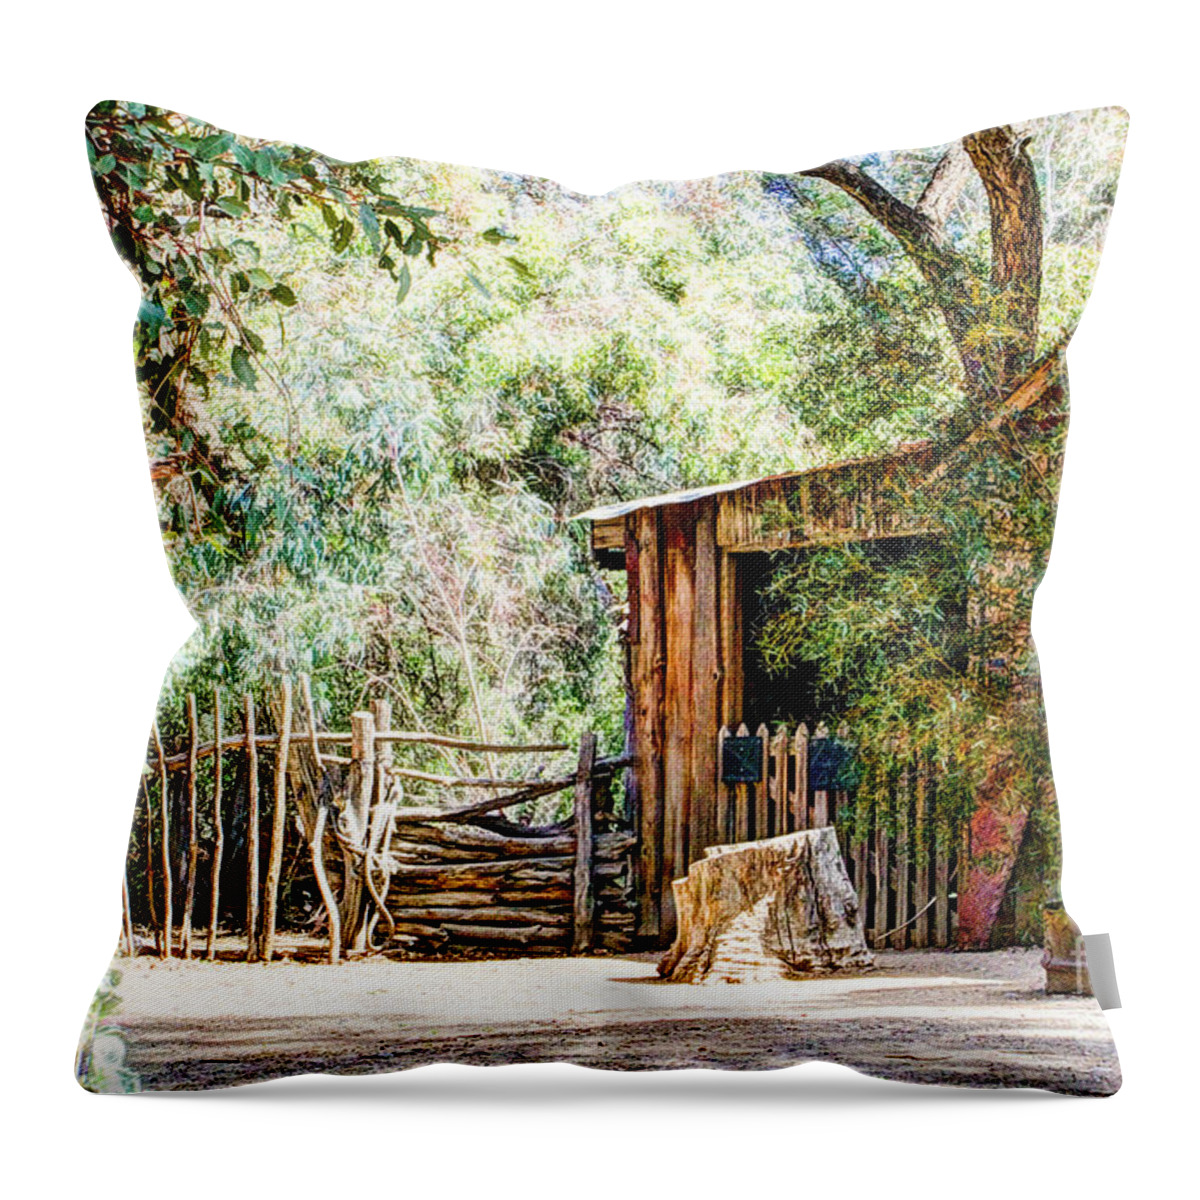 Old Farm Building Throw Pillow featuring the digital art Old Farm Building by Georgianne Giese